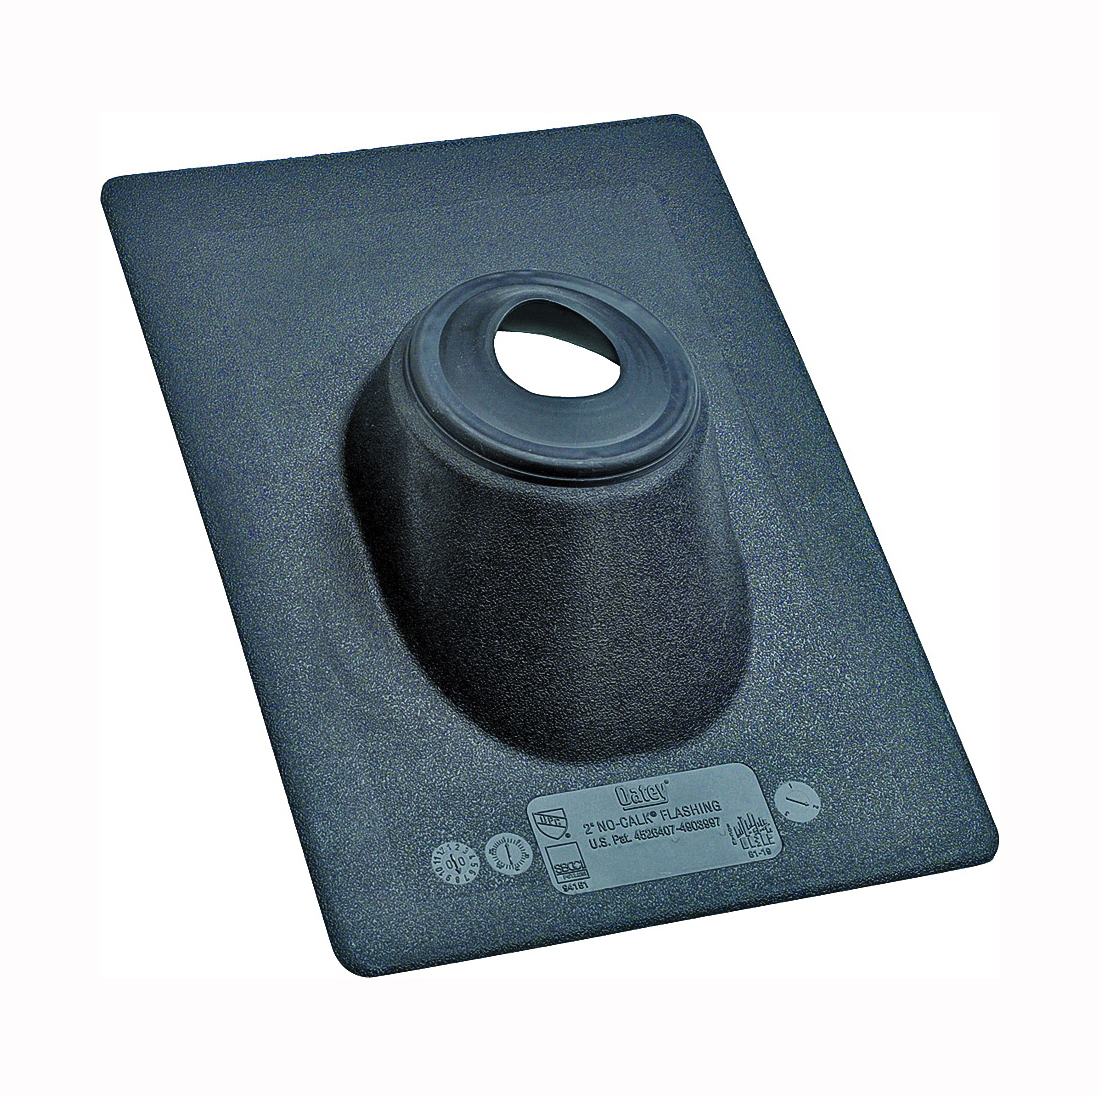 Hercules No-Calk Series 11889 Roof Flashing, 18 in OAL, 18 in OAW, Thermoplastic